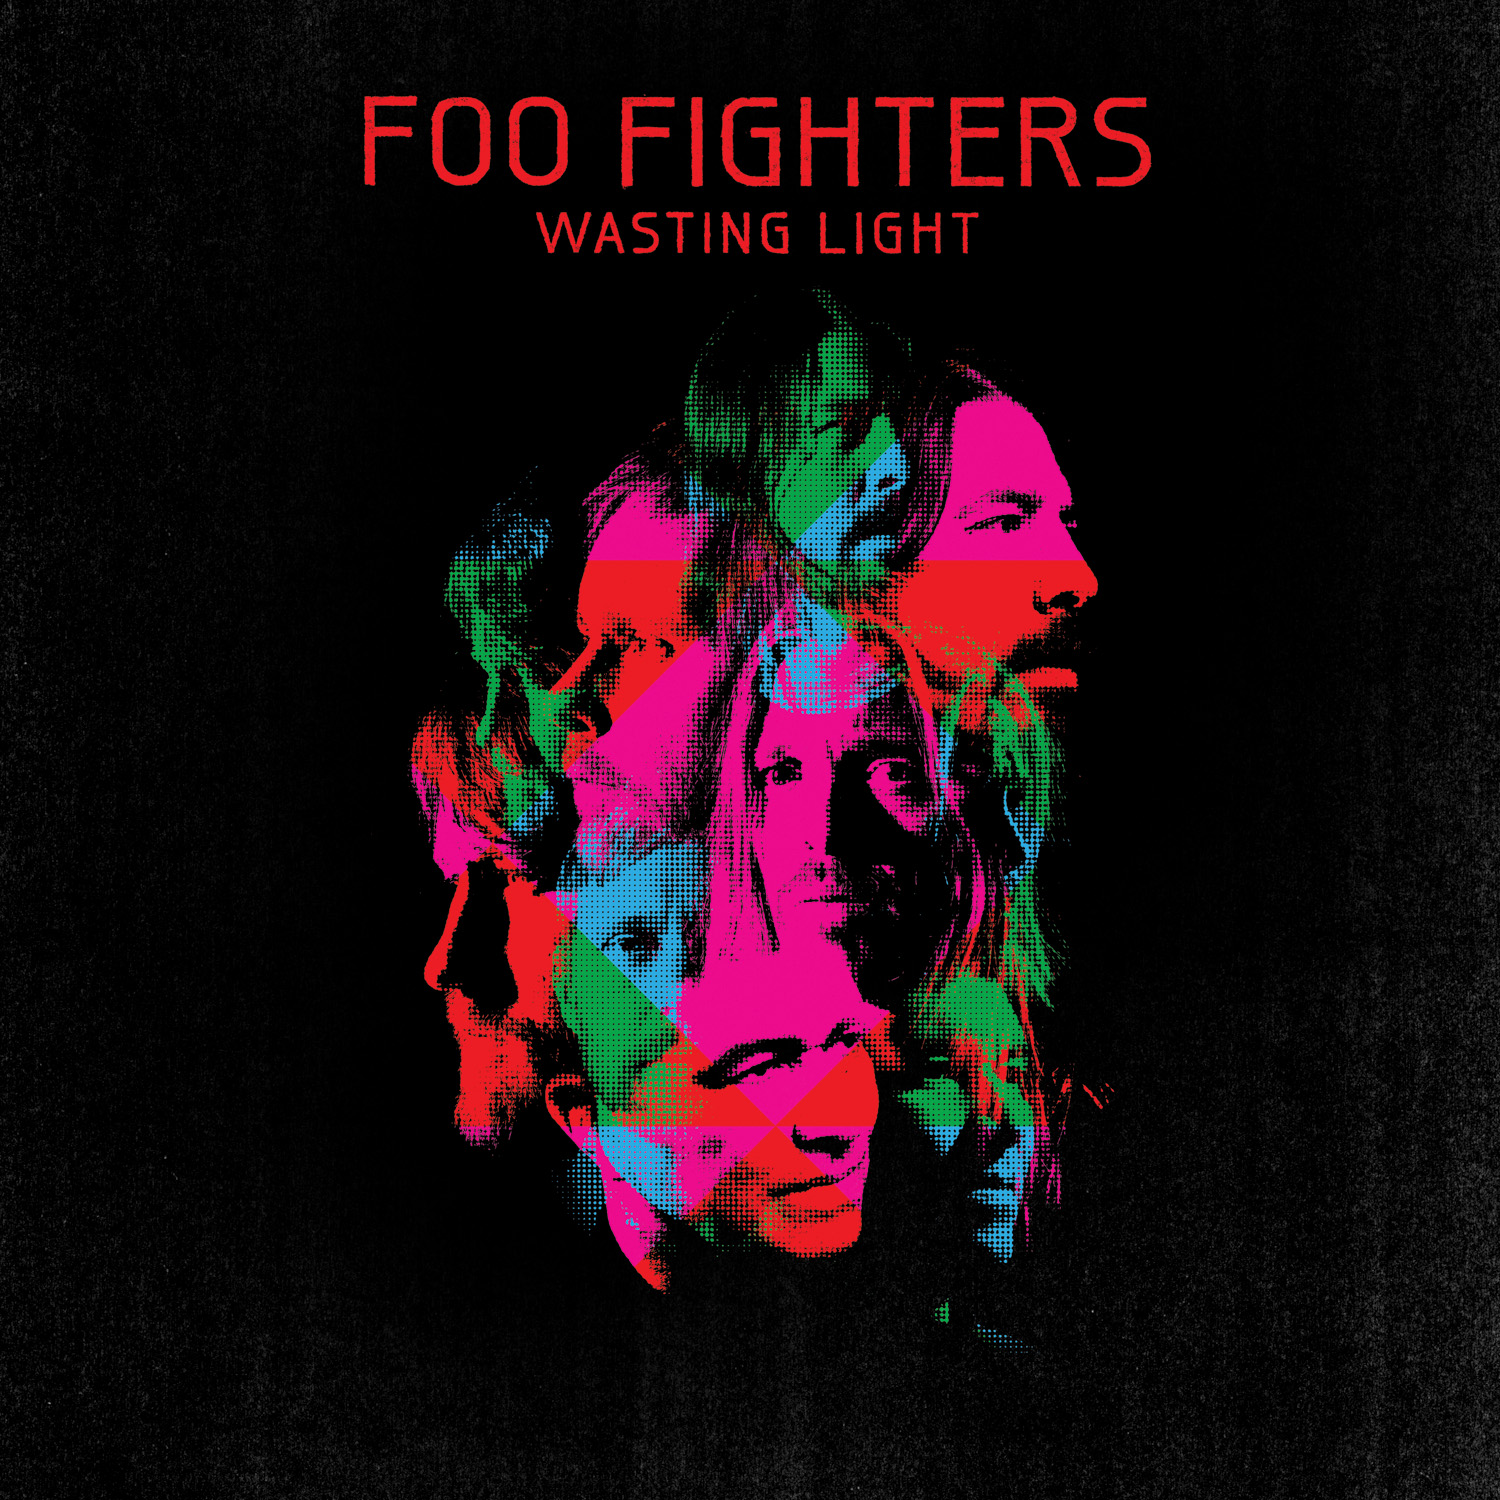 Foo fighters - Wasting Light